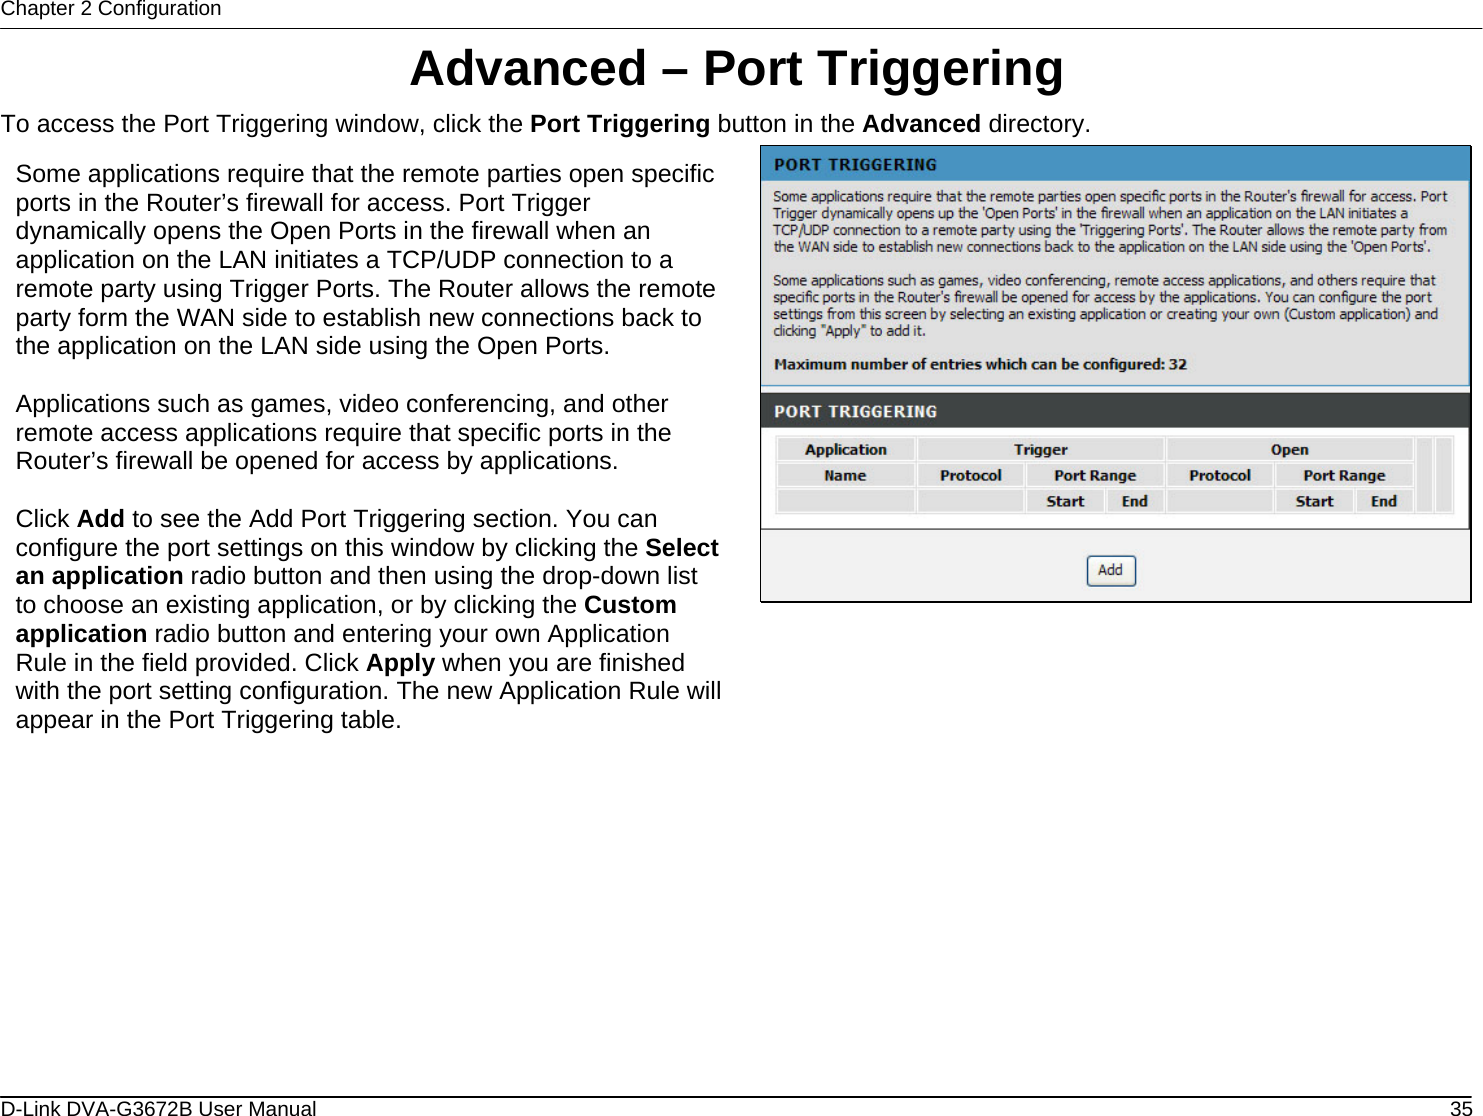 Chapter 2 Configuration Advanced – Port Triggering To access the Port Triggering window, click the Port Triggering button in the Advanced directory.  Some applications require that the remote parties open specific ports in the Router’s firewall for access. Port Trigger dynamically opens the Open Ports in the firewall when an application on the LAN initiates a TCP/UDP connection to a remote party using Trigger Ports. The Router allows the remote party form the WAN side to establish new connections back to the application on the LAN side using the Open Ports.  Applications such as games, video conferencing, and other remote access applications require that specific ports in the Router’s firewall be opened for access by applications.   Click Add to see the Add Port Triggering section. You can configure the port settings on this window by clicking the Select an application radio button and then using the drop-down list to choose an existing application, or by clicking the Custom application radio button and entering your own Application Rule in the field provided. Click Apply when you are finished with the port setting configuration. The new Application Rule will appear in the Port Triggering table.                 D-Link DVA-G3672B User Manual  35